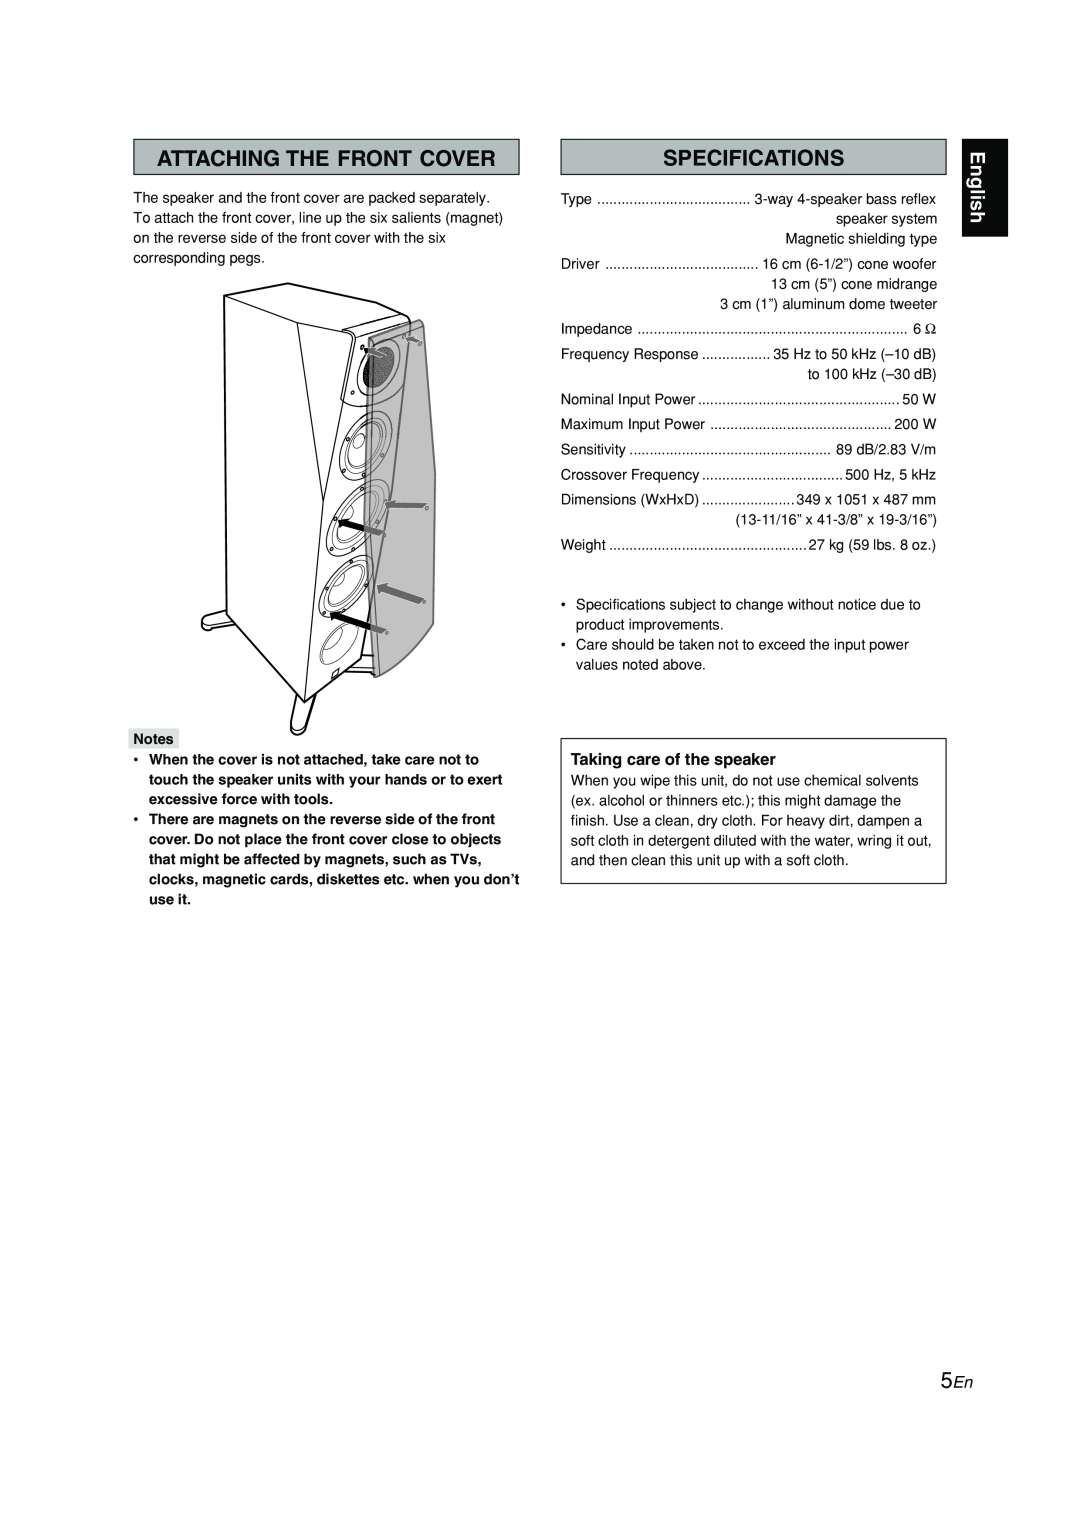 Yamaha Soavo-1 owner manual Attaching The Front Cover, Specifications, Taking care of the speaker, English 